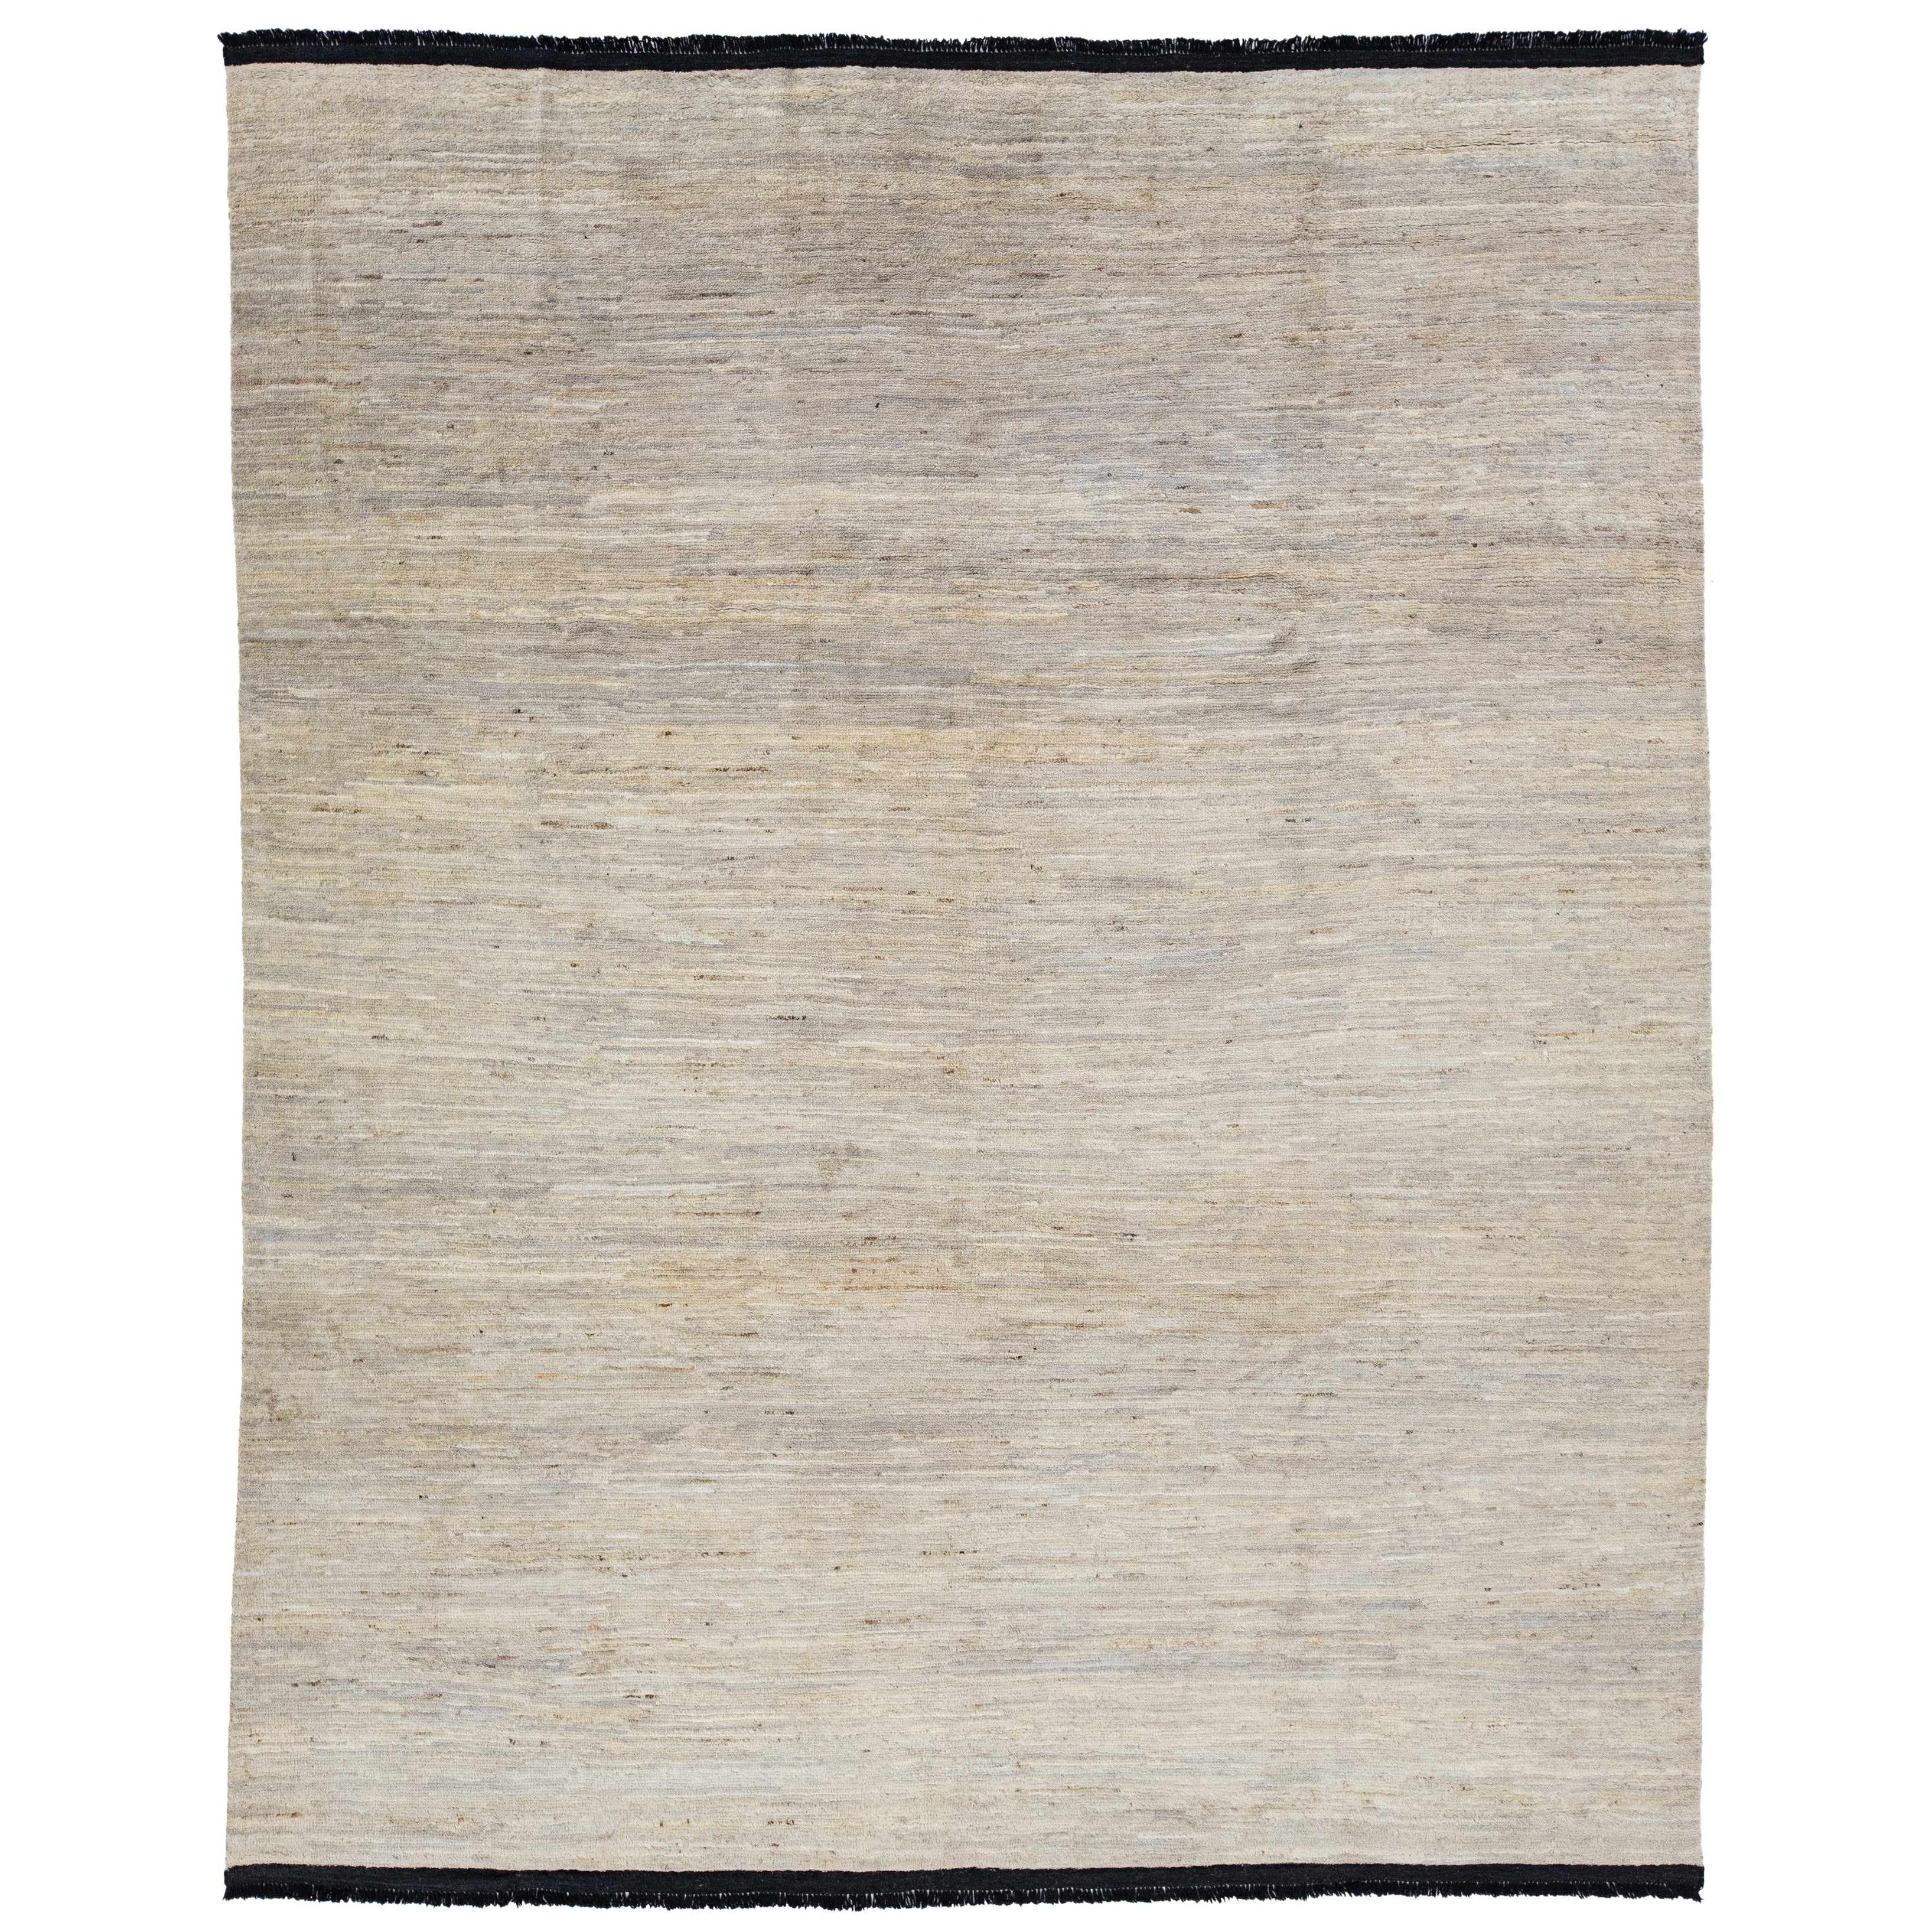 Modern Gabbeh Style Room Size Wool Rug In Beige & Gray Colors